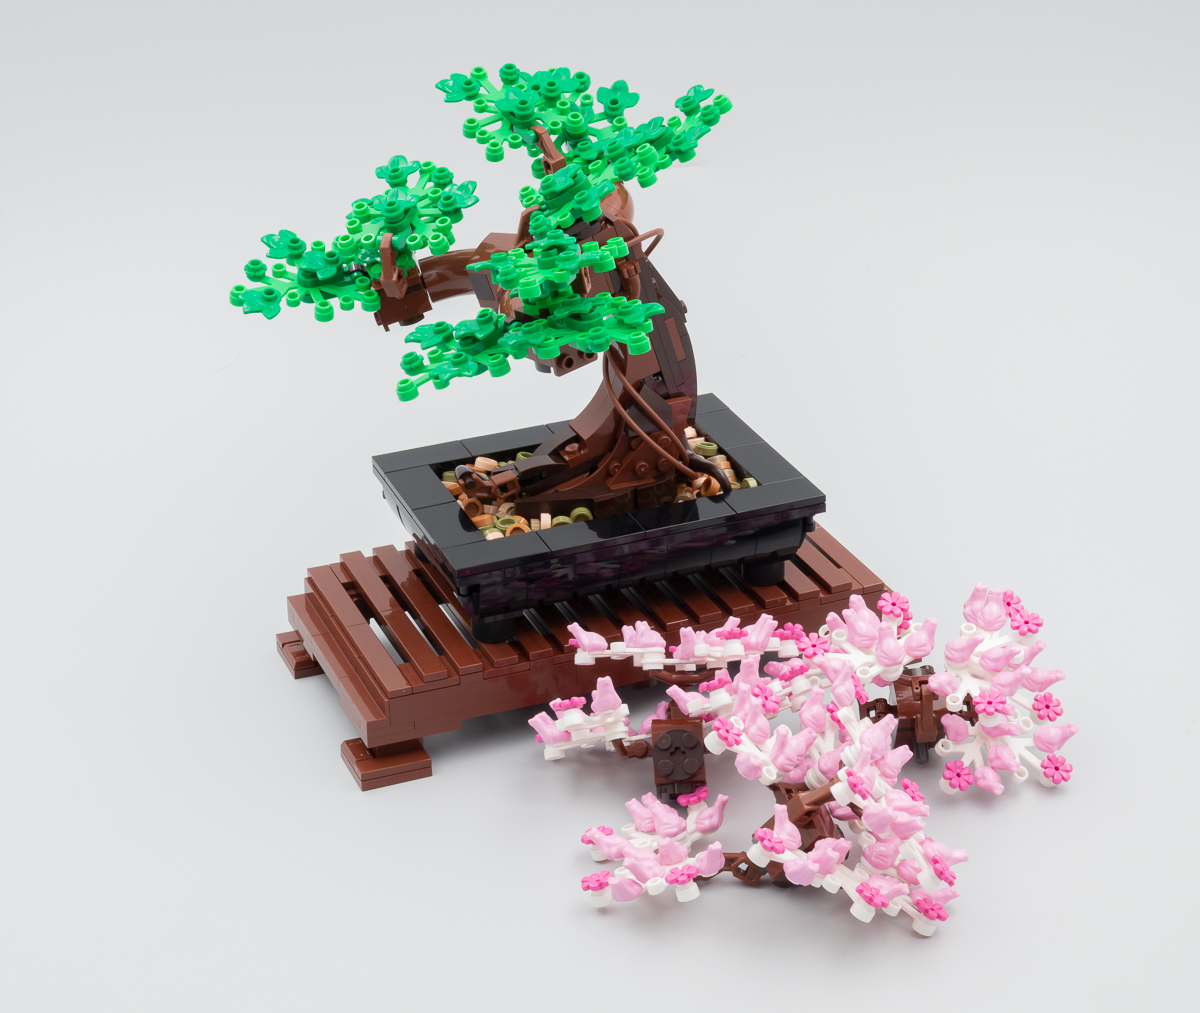 LEGO Botanical Collection 10281 Bonsai Tree has sold out online